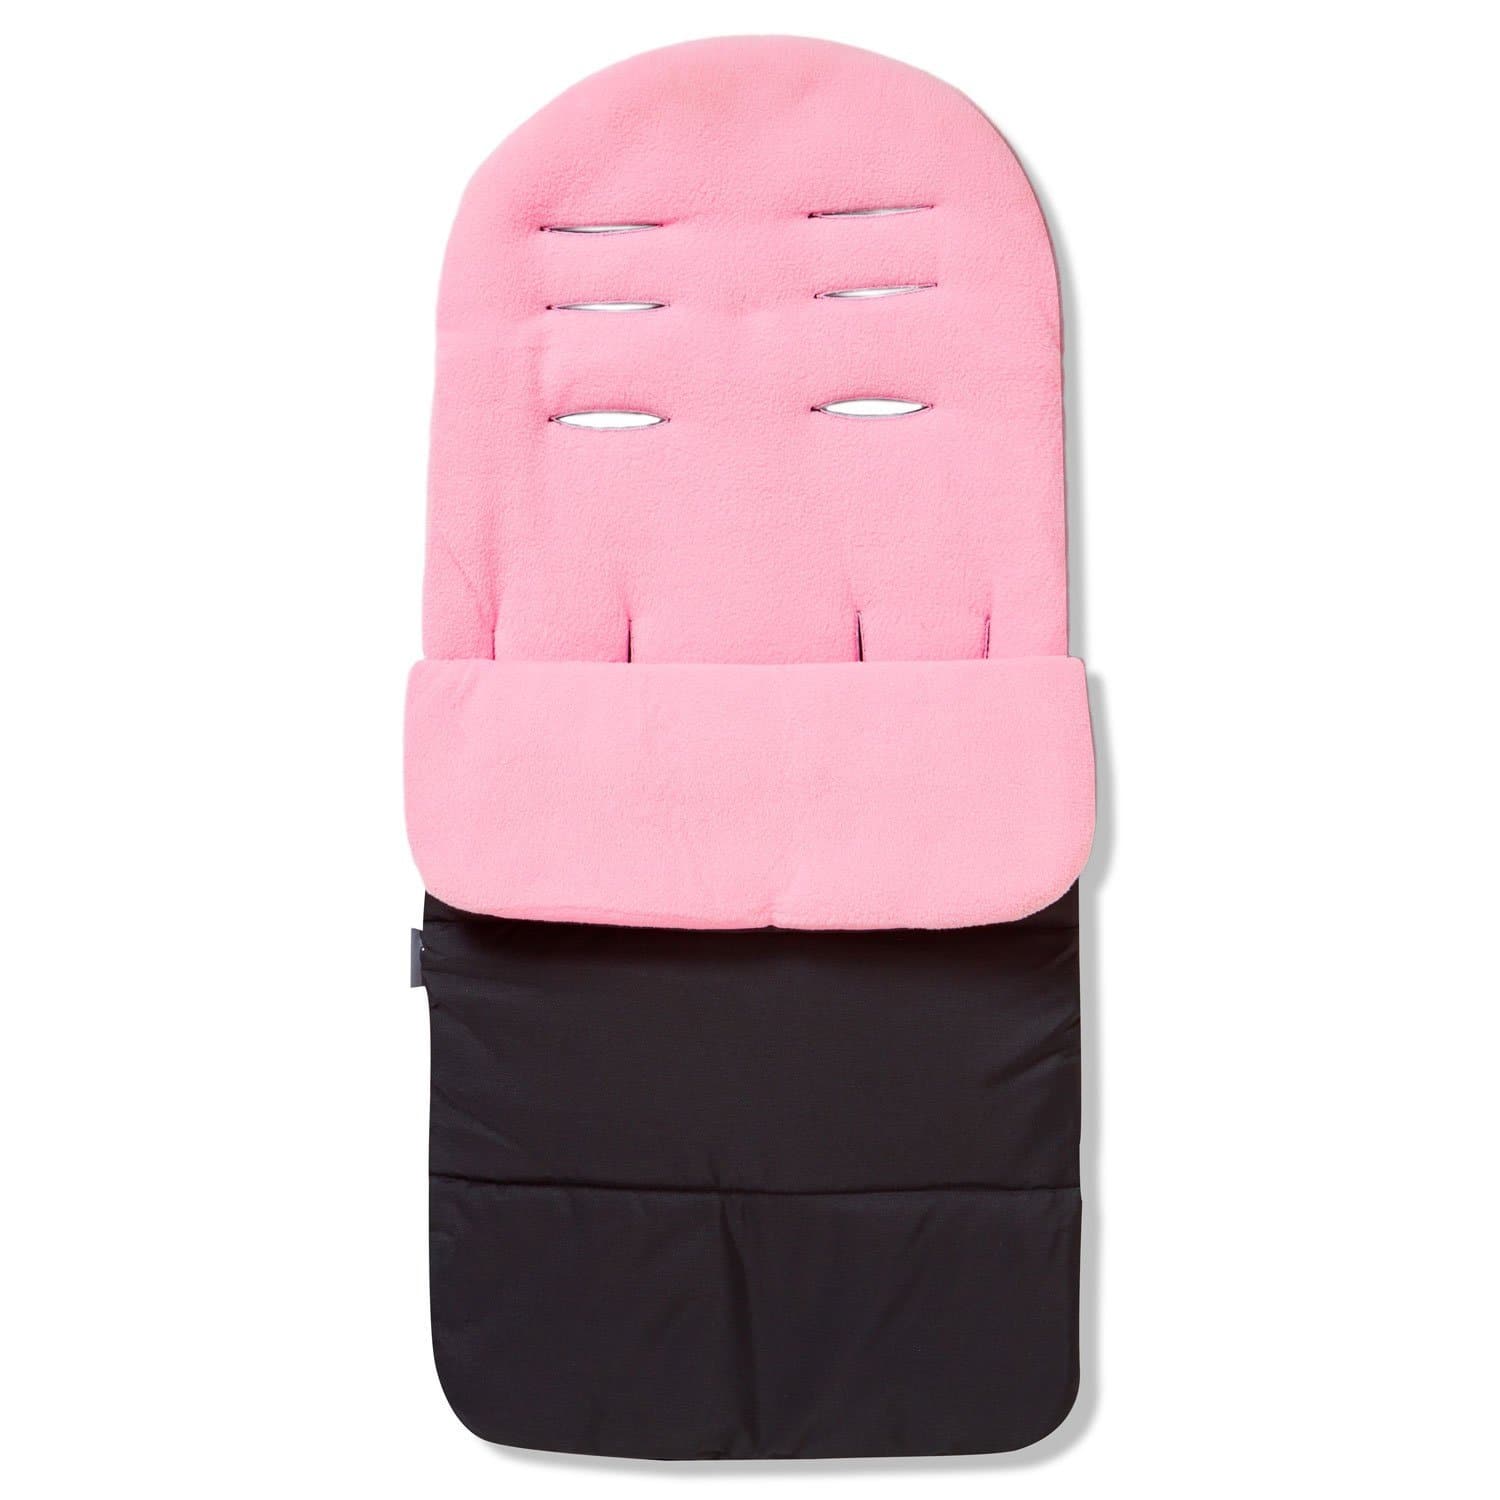 Premium Footmuff / Cosy Toes Compatible with Baby Jogger - Candy Pink / Fits All Models | For Your Little One